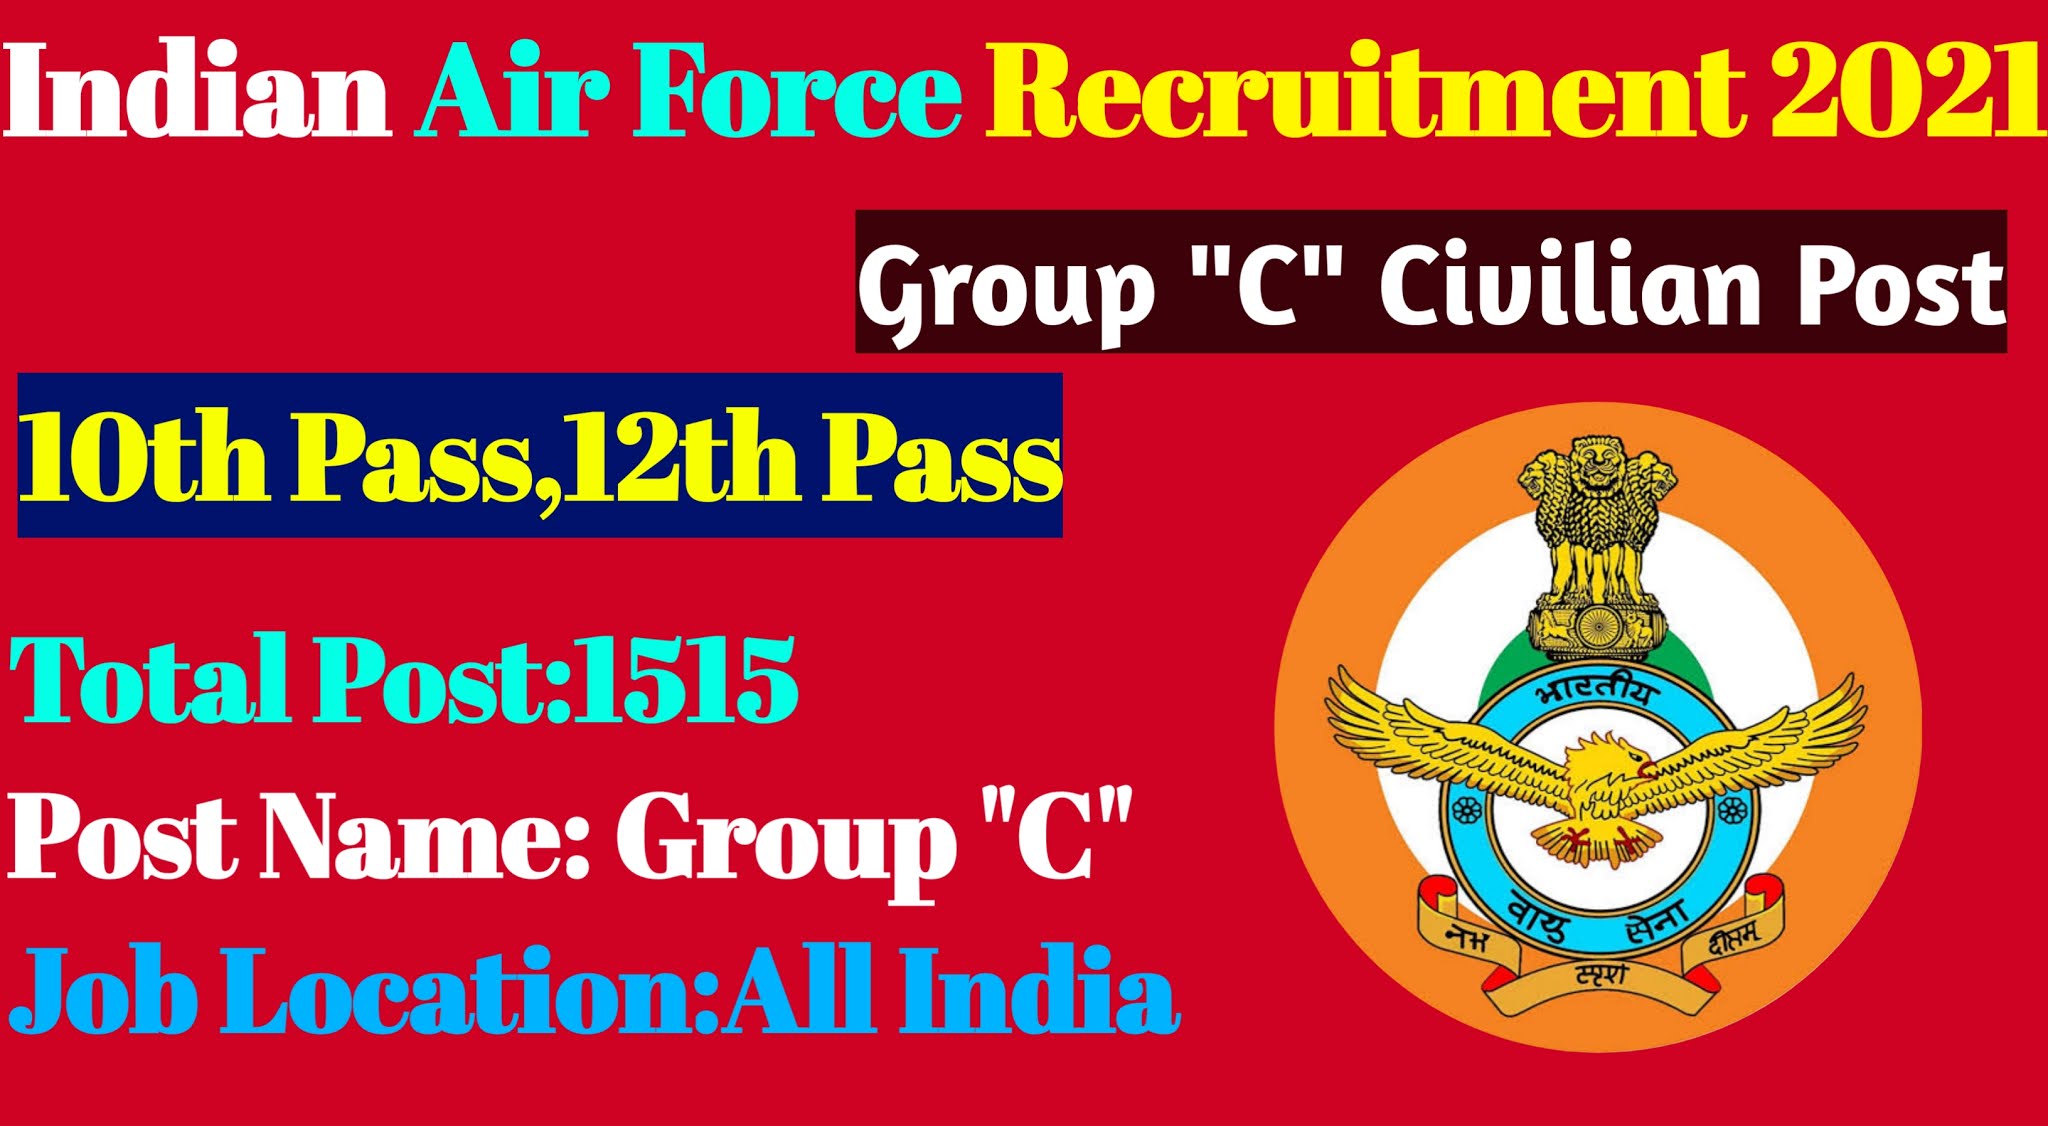 Indian Air Force Group C Recruitment 2021,indian air force recruitment 2021,Indian Air Force Group C Civilian Recruitment 2021 PDF Download,Iaf recruitment 2021,Indian Air Force Recruitment 2021 12th pass,Indian Air Force Recruitment 2021 Group C application form,IAF Group C Recruitment 2021 Notification PDF,Indian Air Force Recruitment 2021: Apply Online,Indian Air Force Group C salary,Indian Air Force Recruitment 2021 Notification